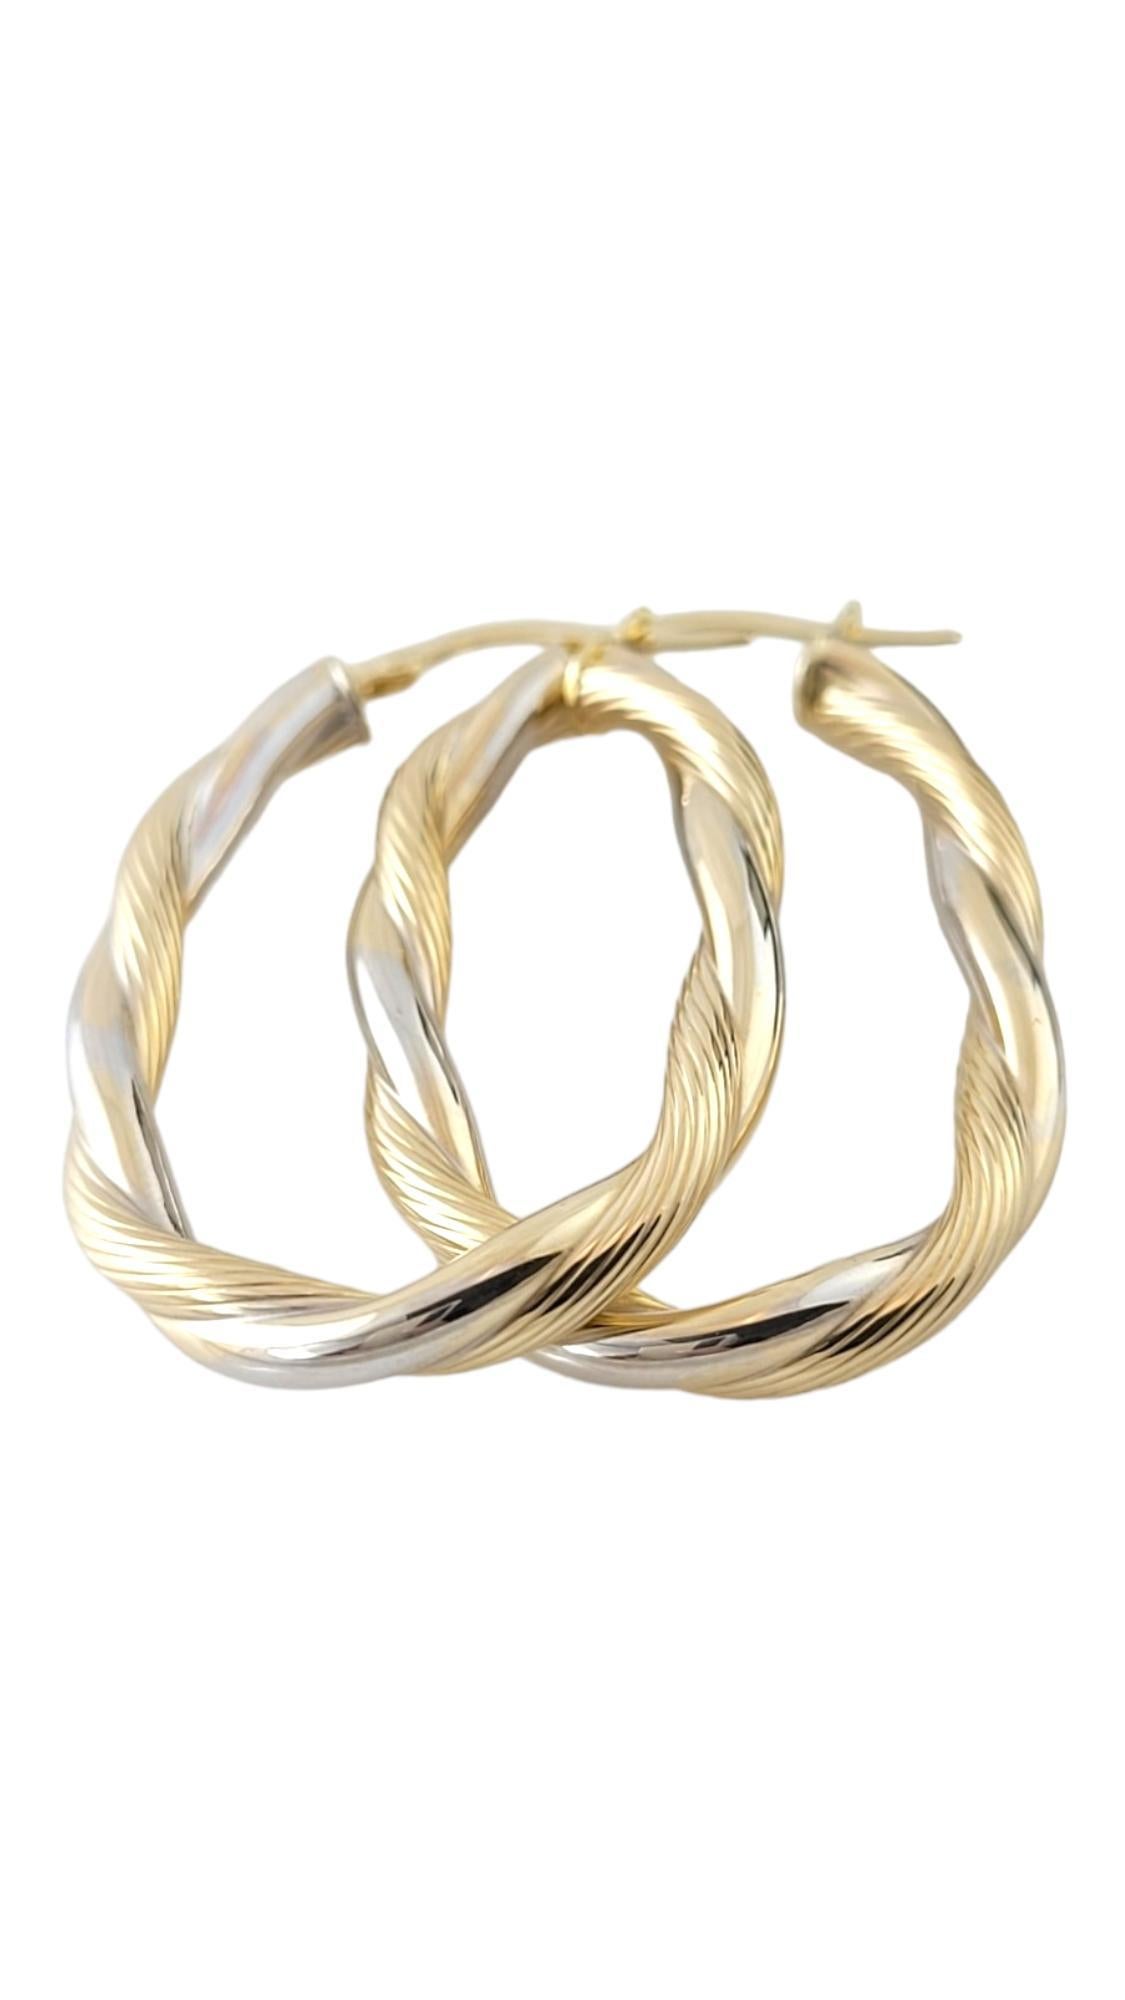 14K Yellow & White Gold Twisted Oval Hoops #16873

This beautiful set of large oval hoop earrings is in a gorgeous, twisted pattern crafted from 14K yellow and white gold!

Size: 38.6mm X 3.5mm X 2.7mm

Weight: 1.8 dwt/ 2.9 g

Hallmark: 14KT Italy